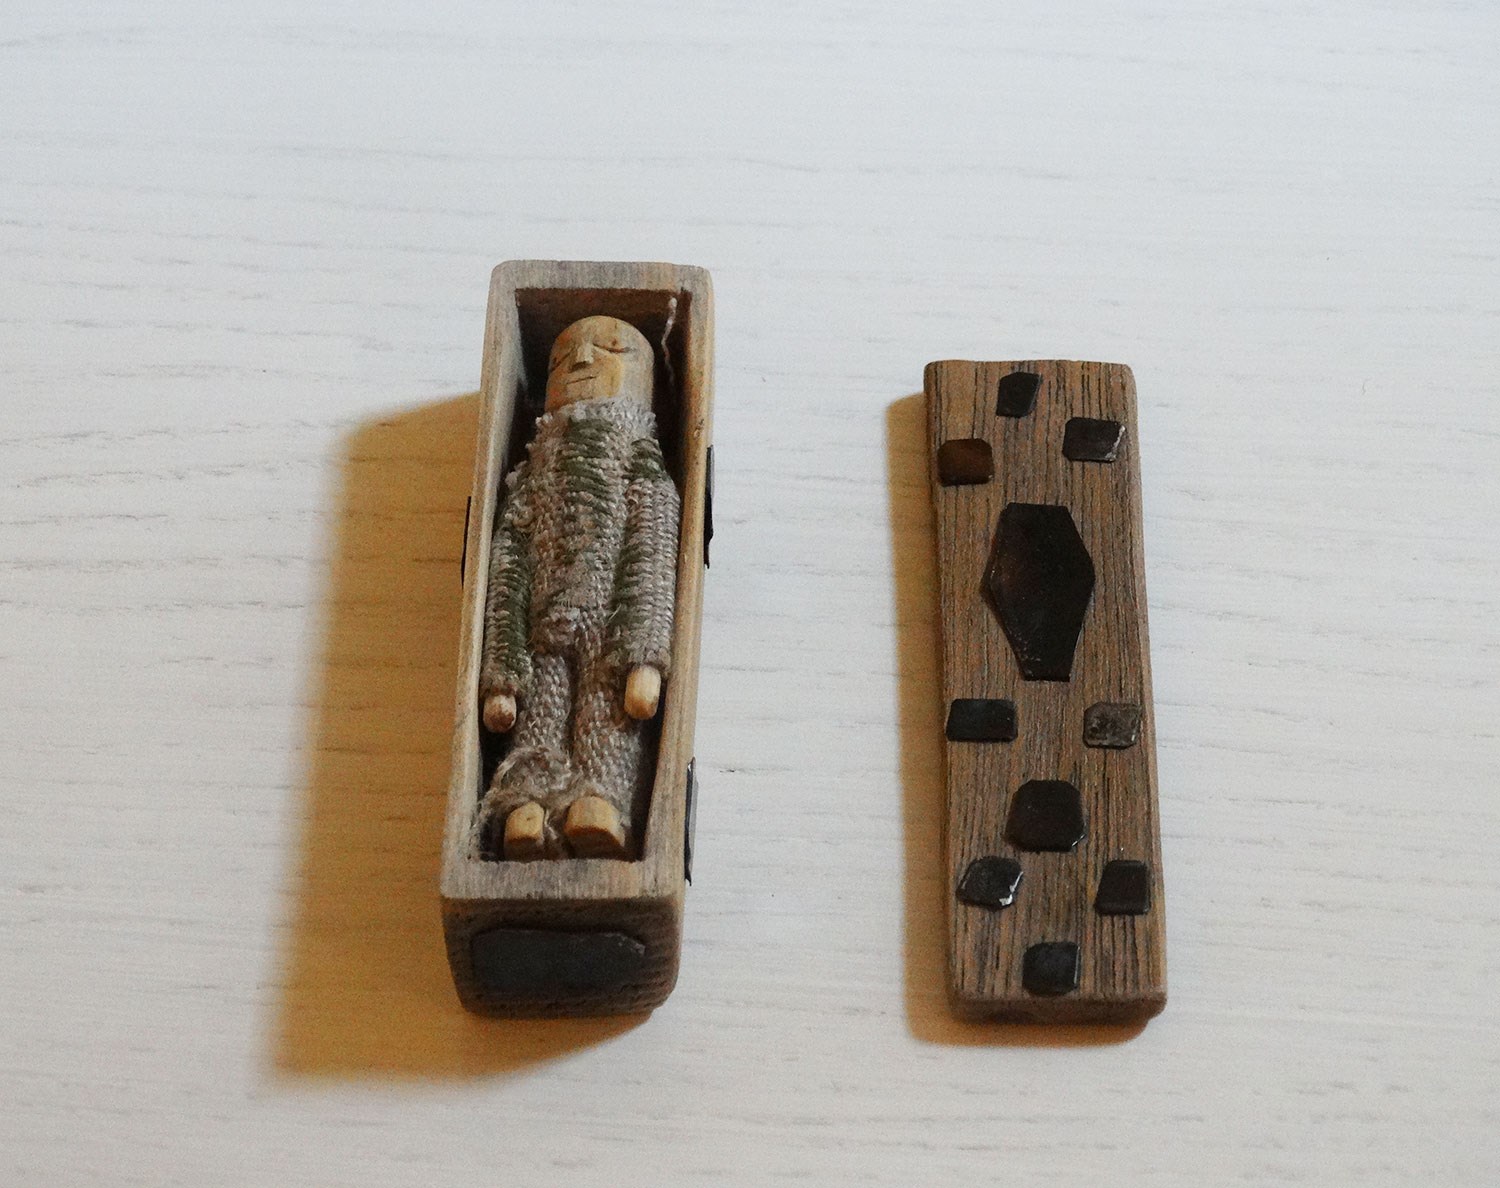 A small open wooden coffin with a doll dressed in a knitwear-like outfit inside.